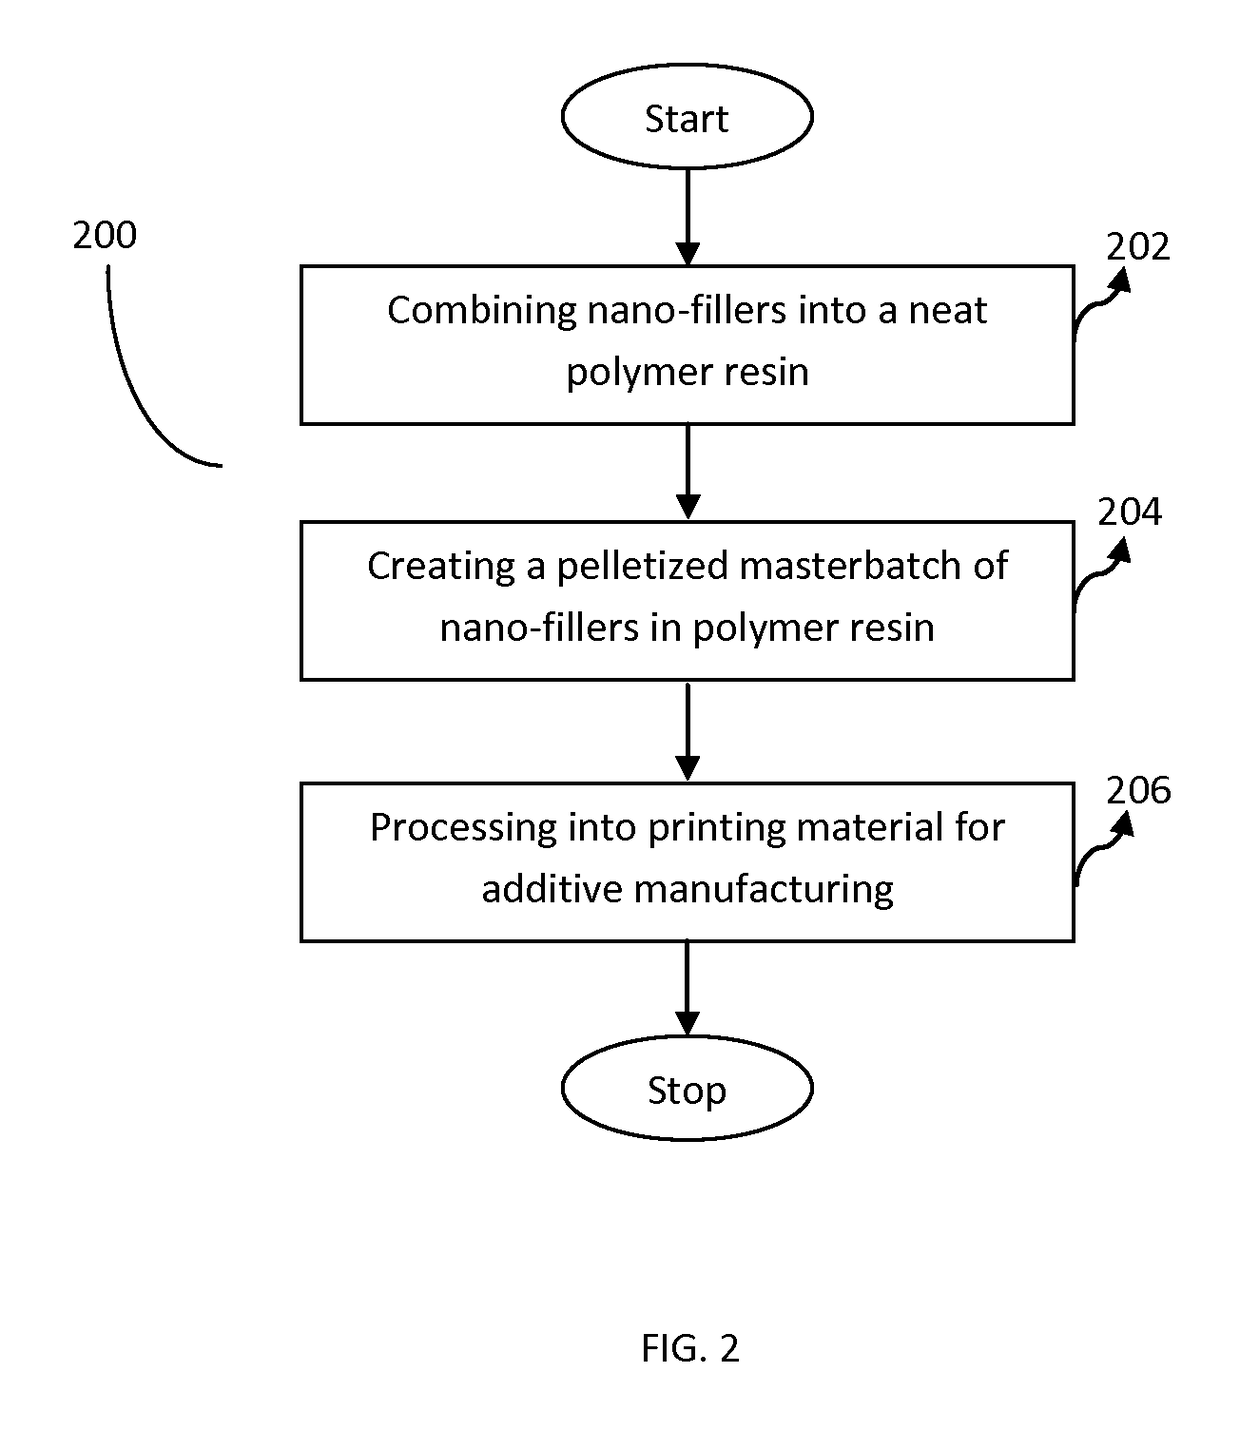 Method to manufacture polymer composite materials with nano-fillers for use in additive manufacturing to improve material properties